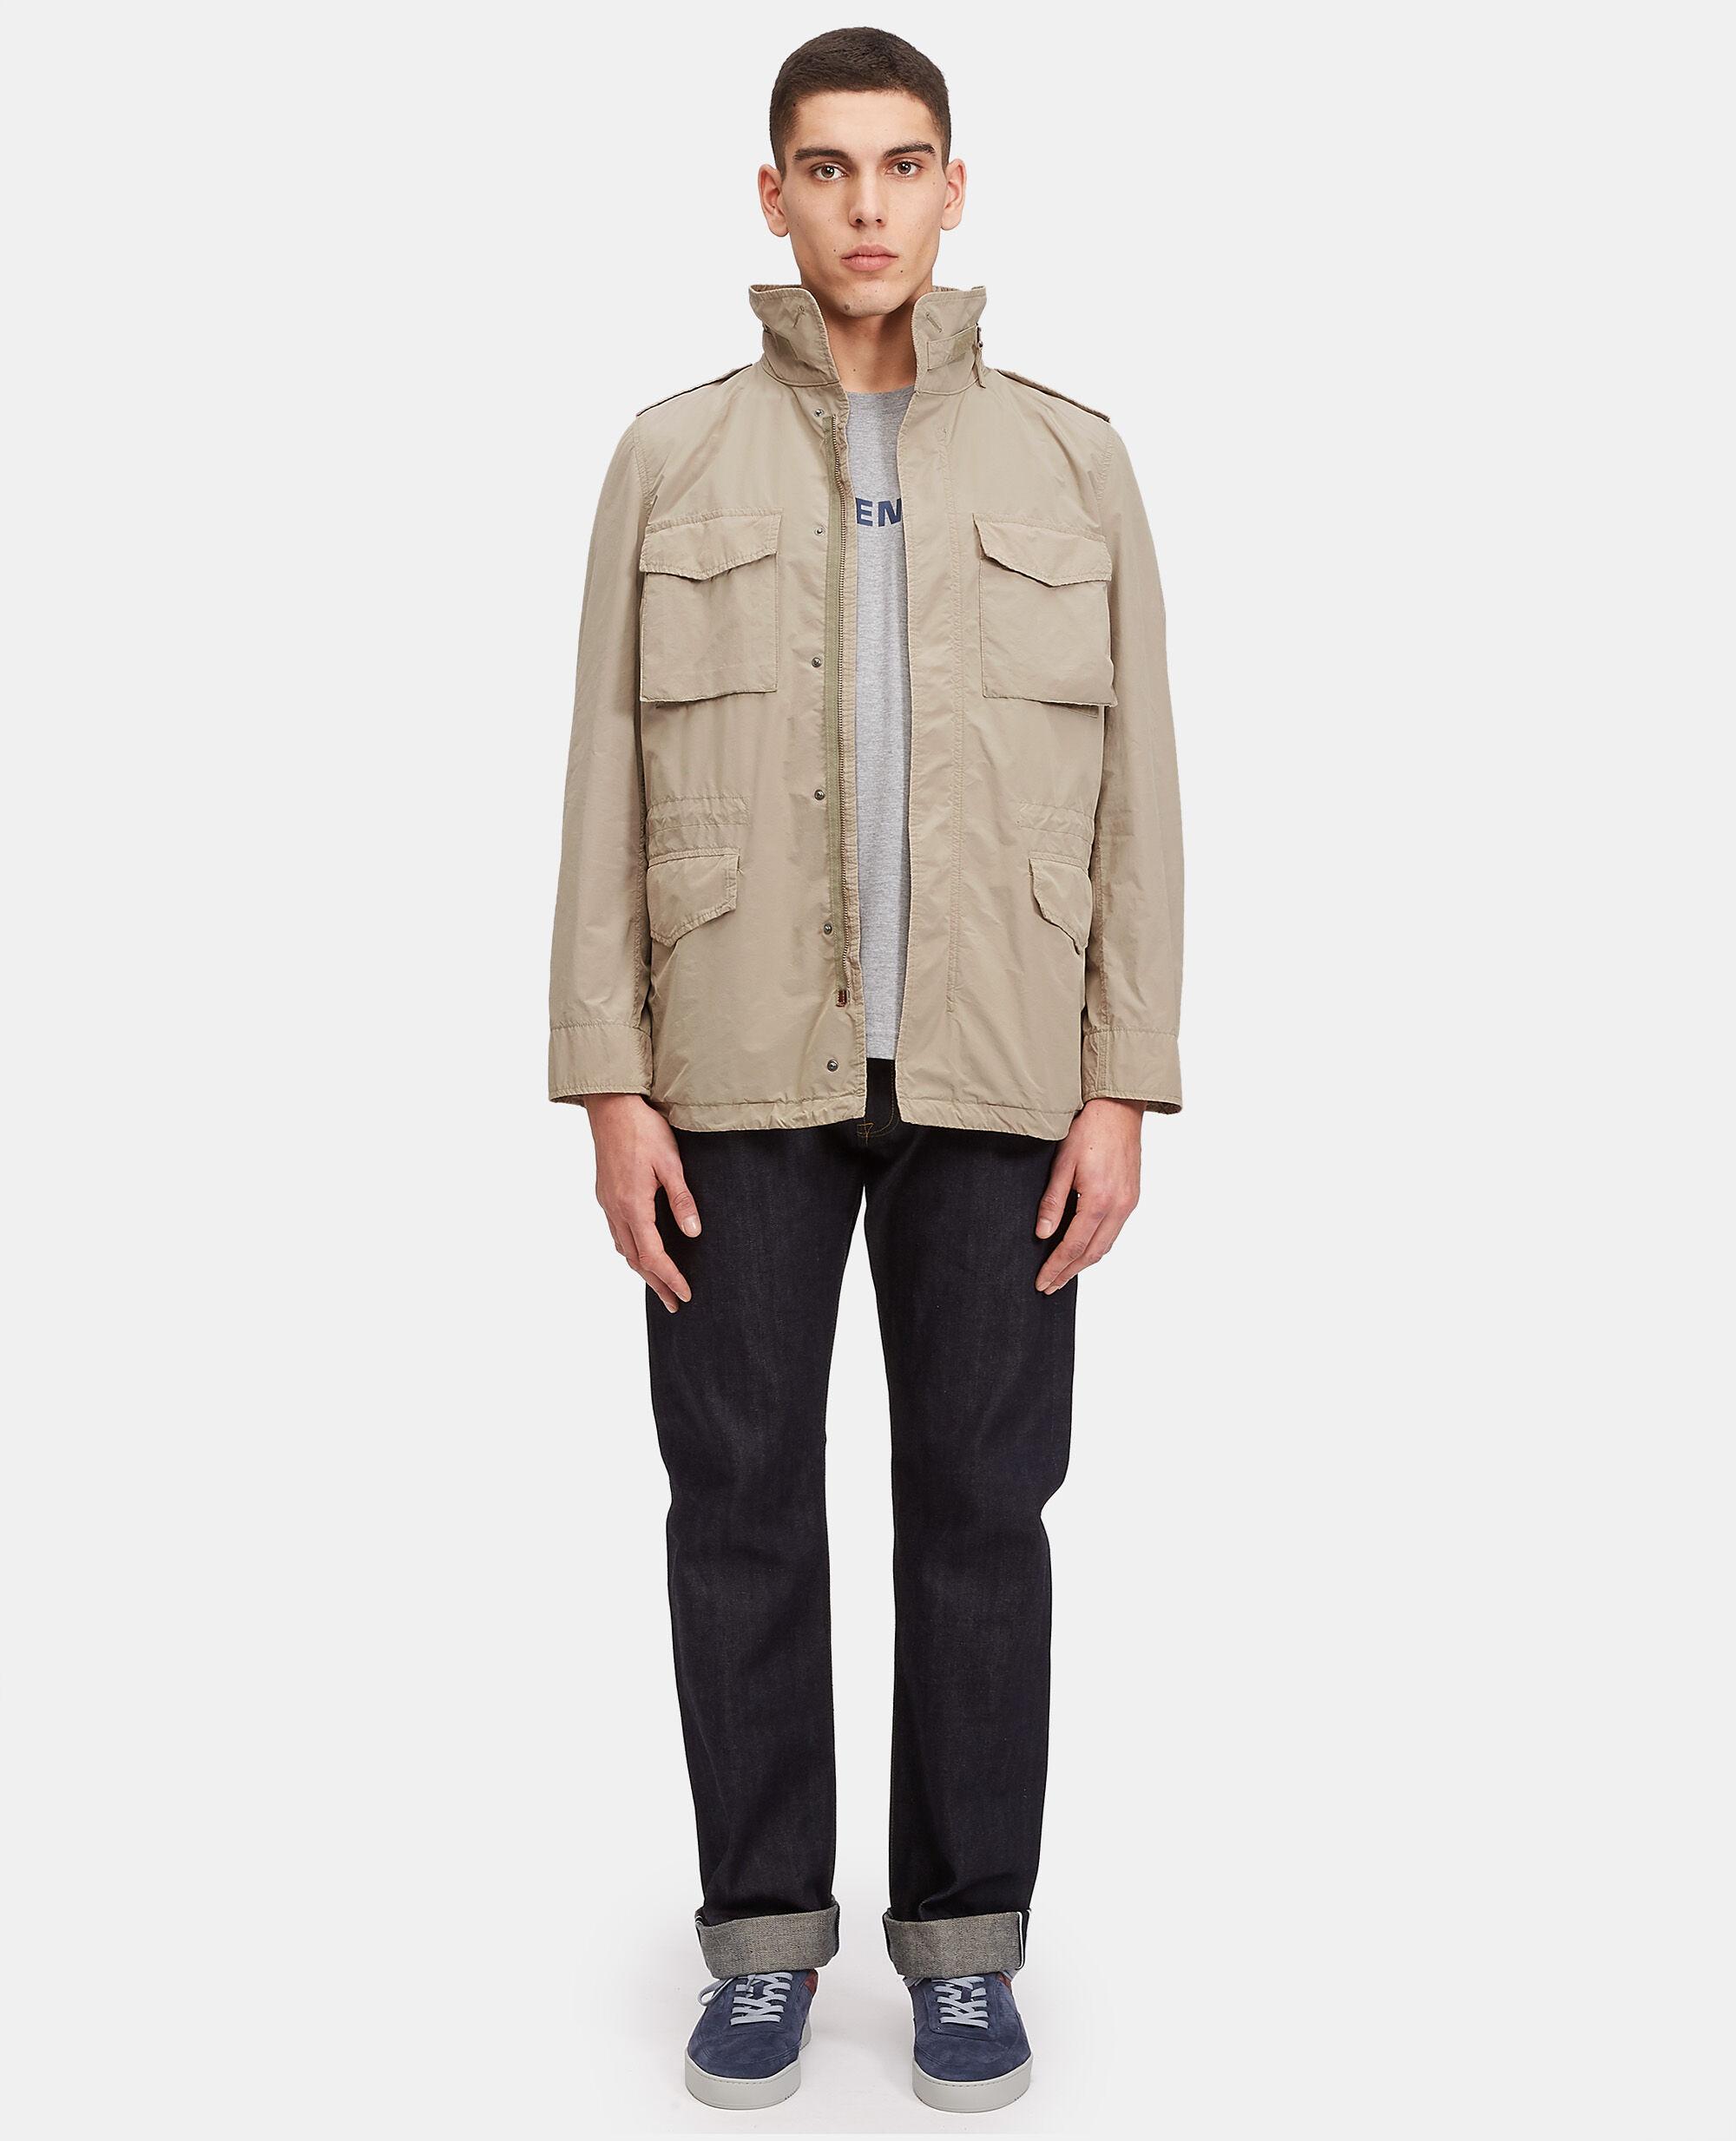 Aspesi Synthetic Field Jacket 65 Replica in Sand (Natural) for Men - Lyst